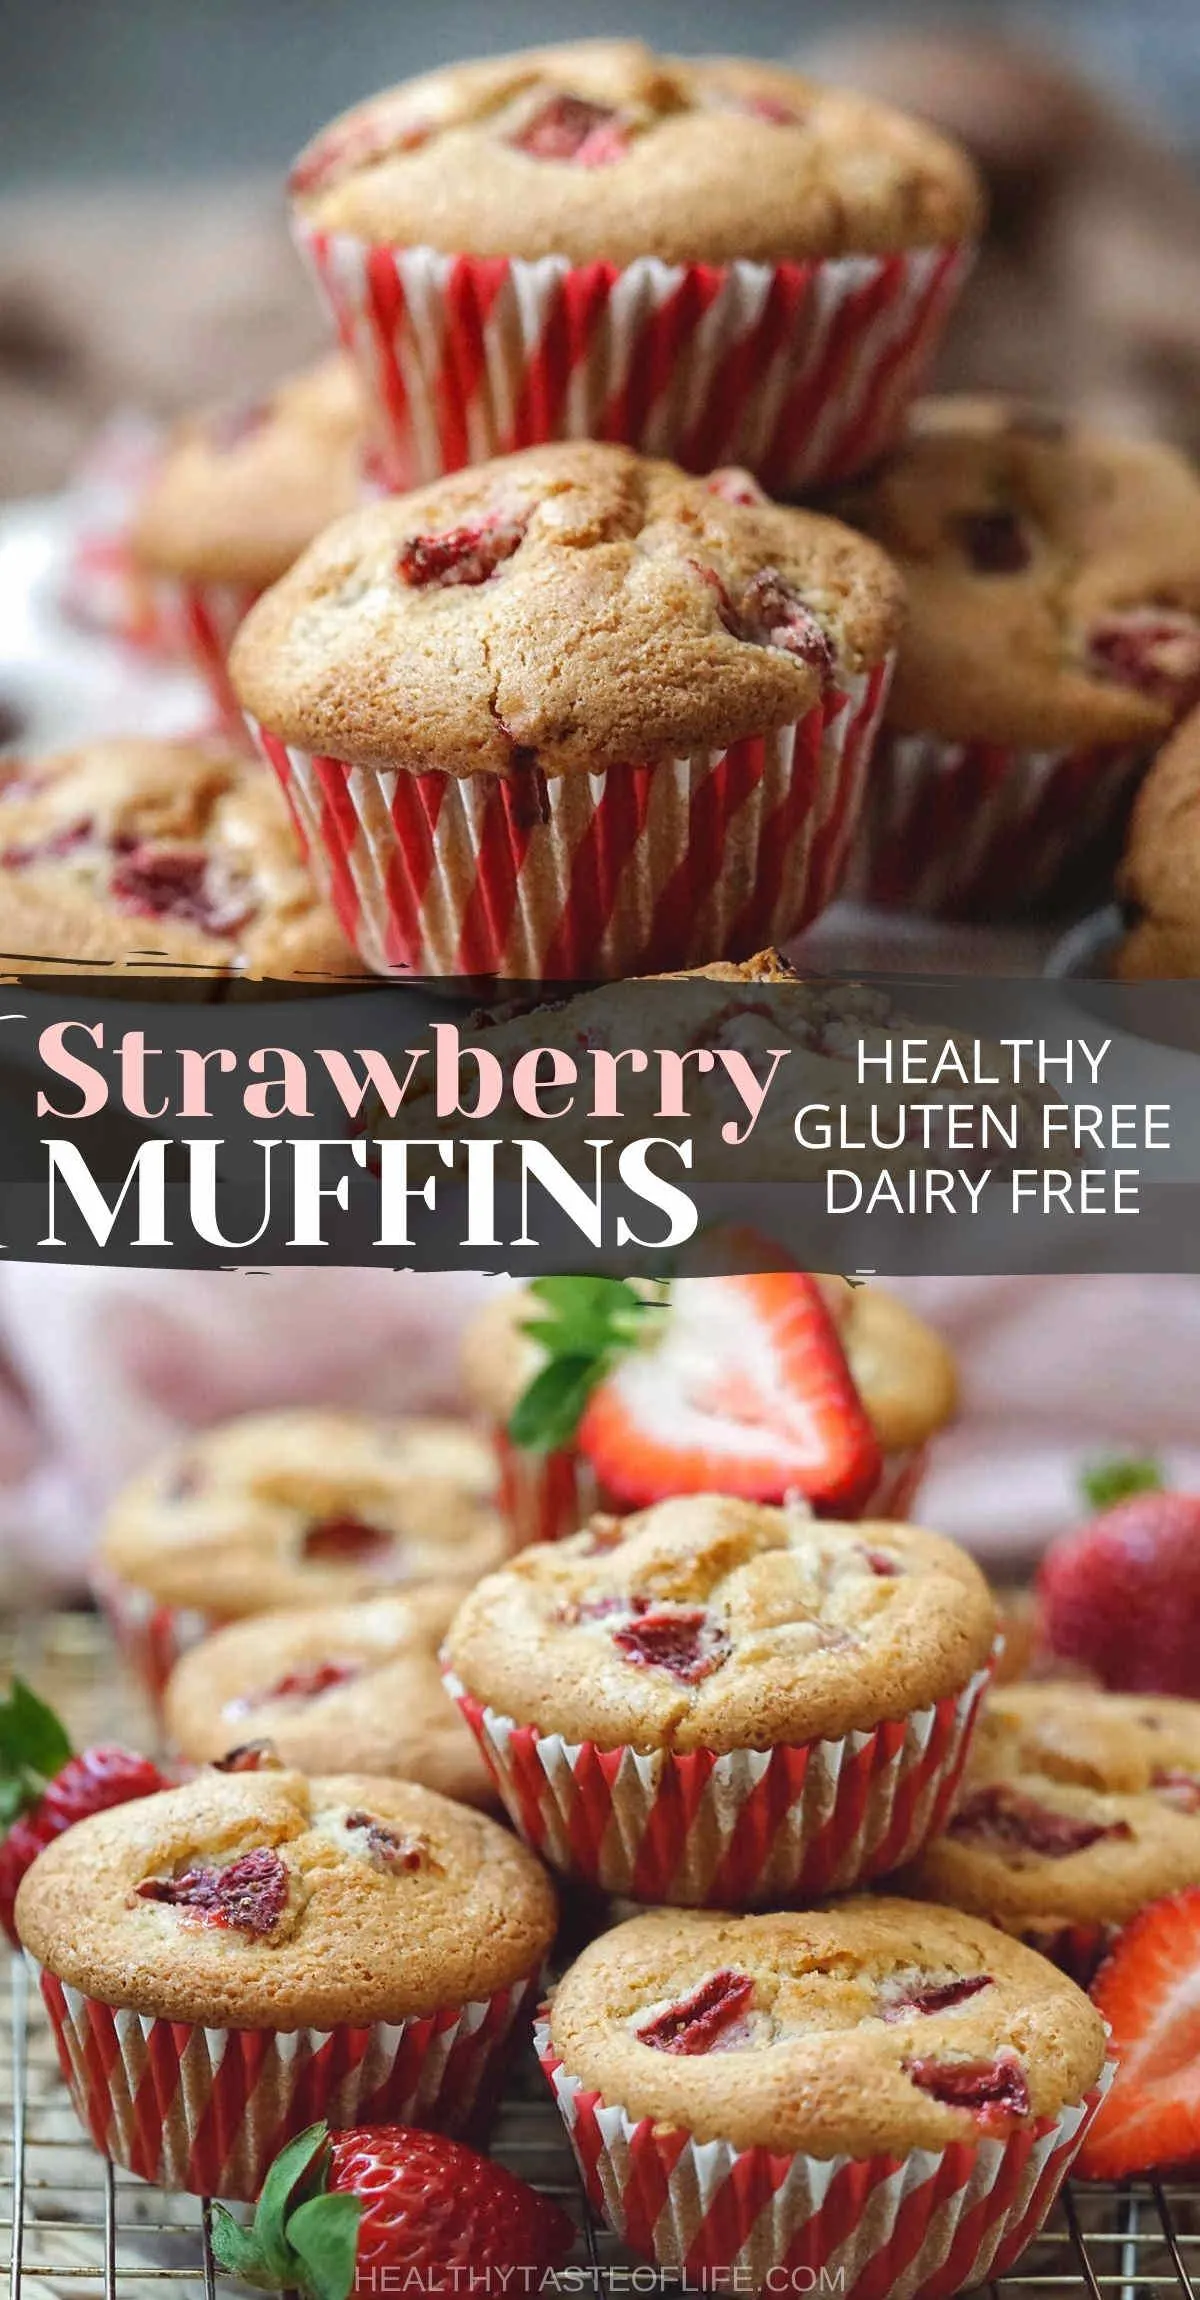 Strawberry Muffins Recipe Healthy Easy Gluten Free And Dairy Free.